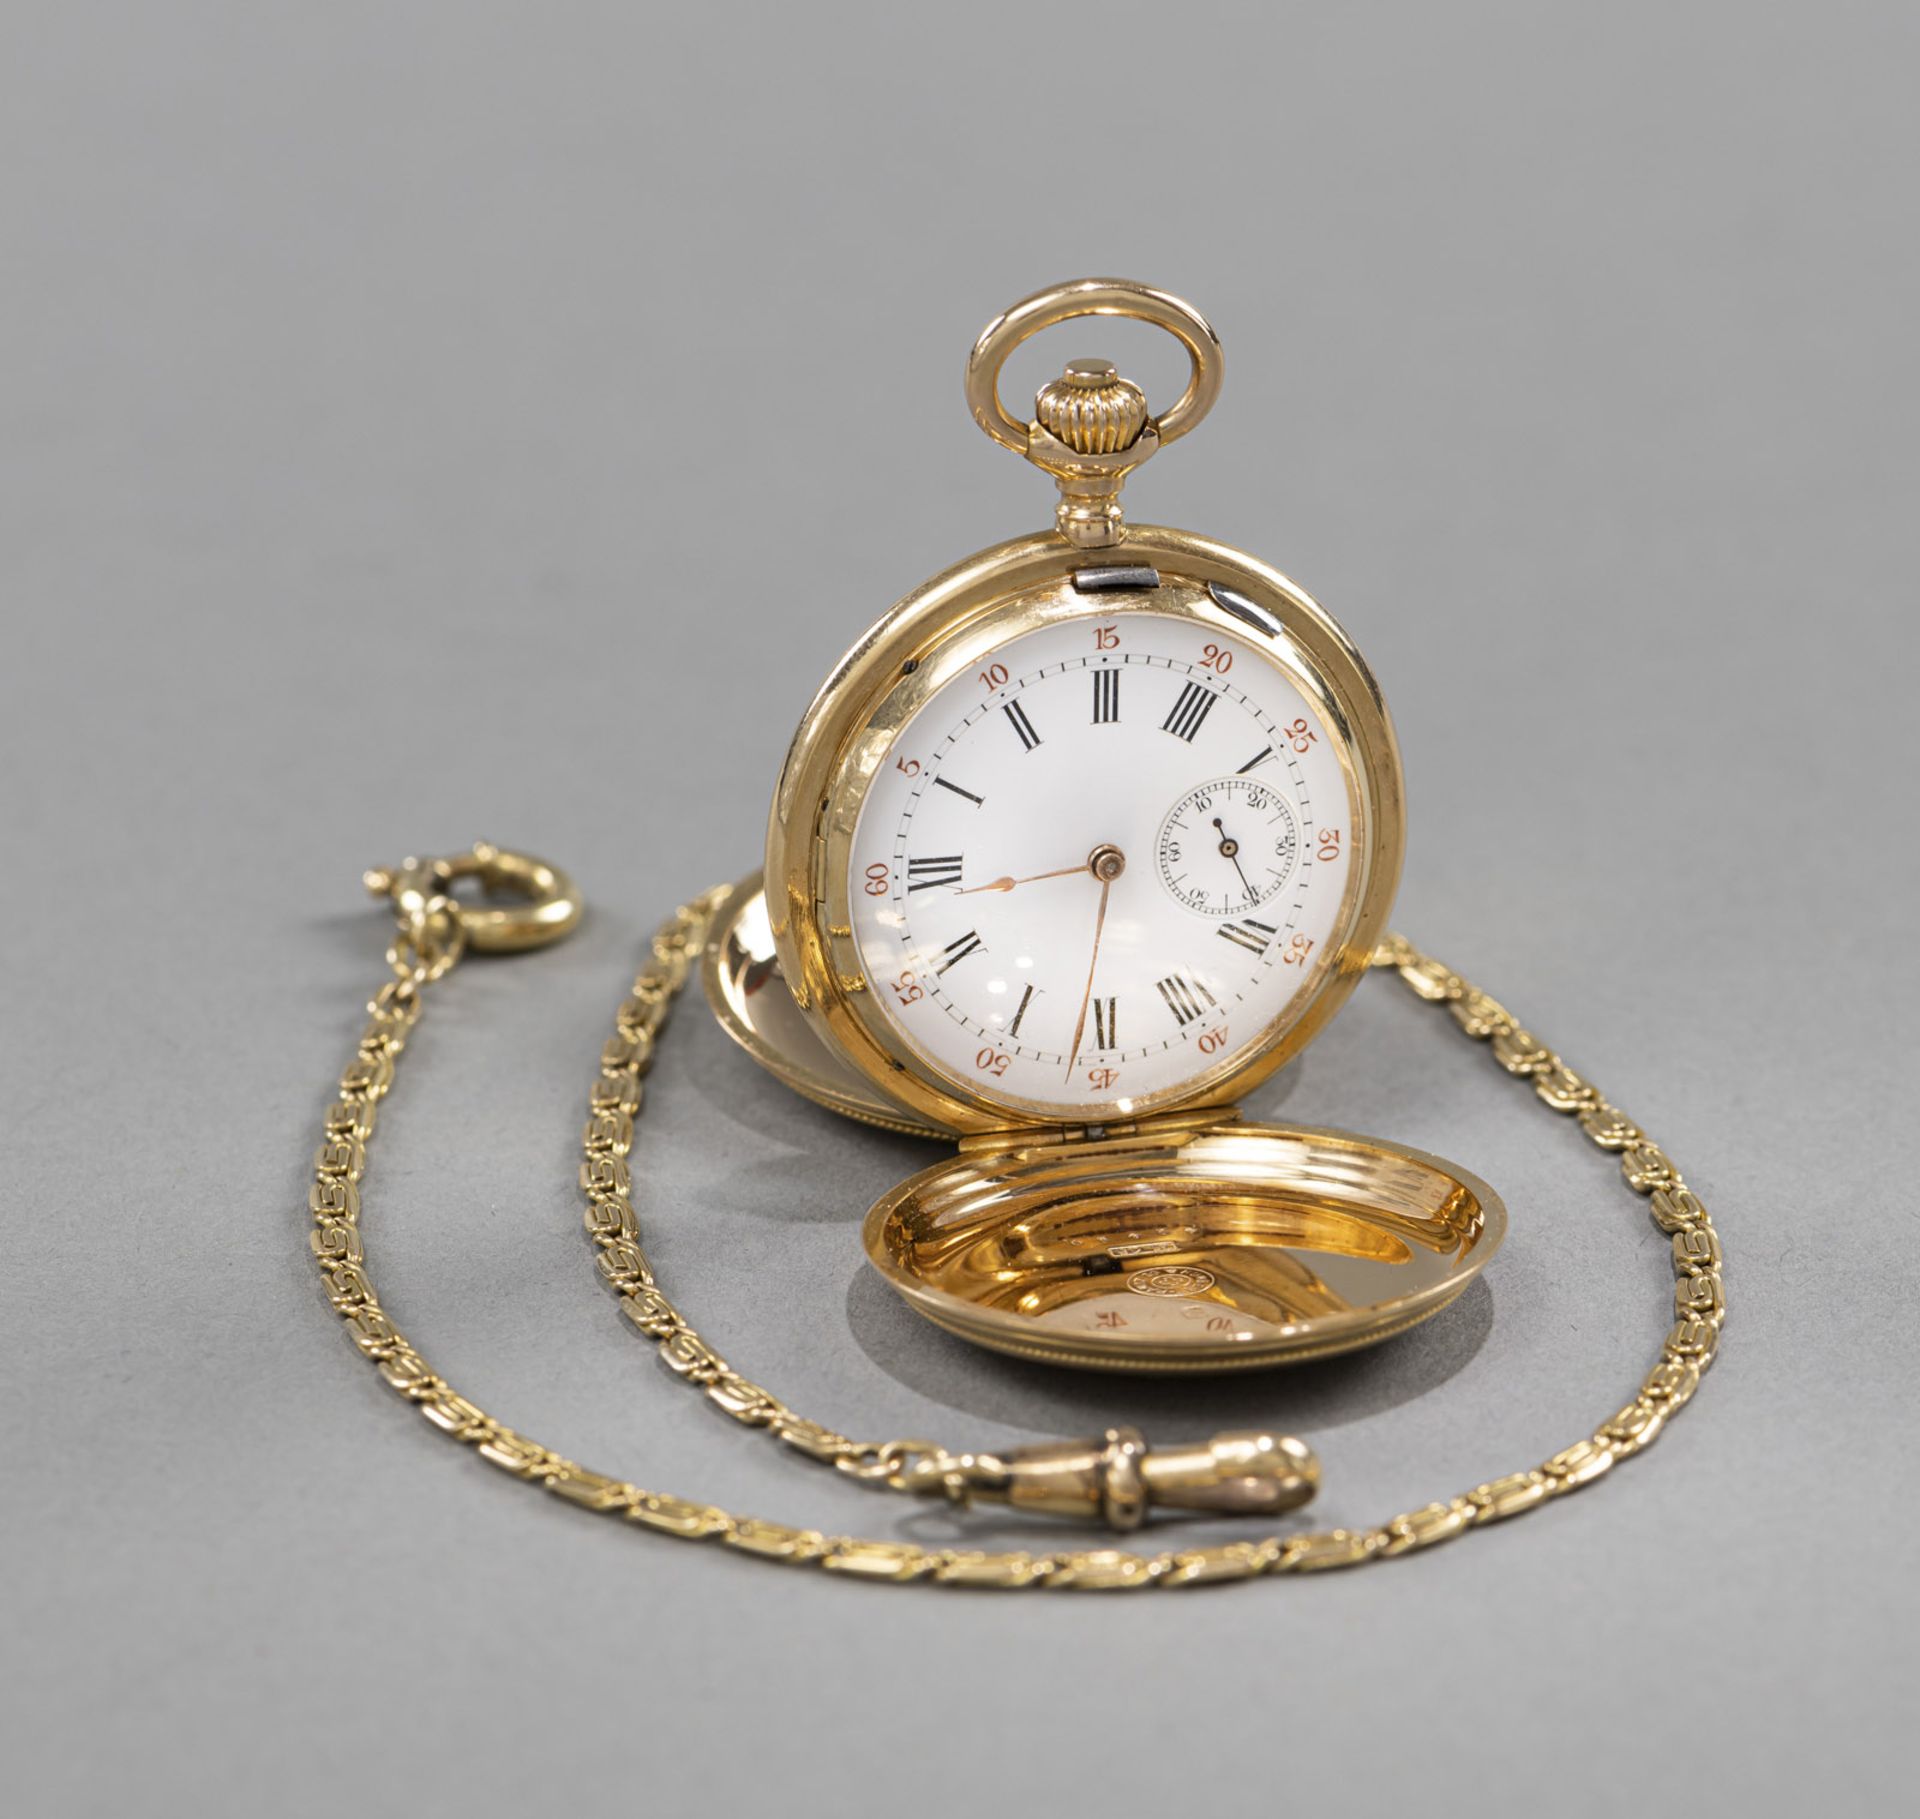 A LADY'S WATCH WITH WATCH CHAIN